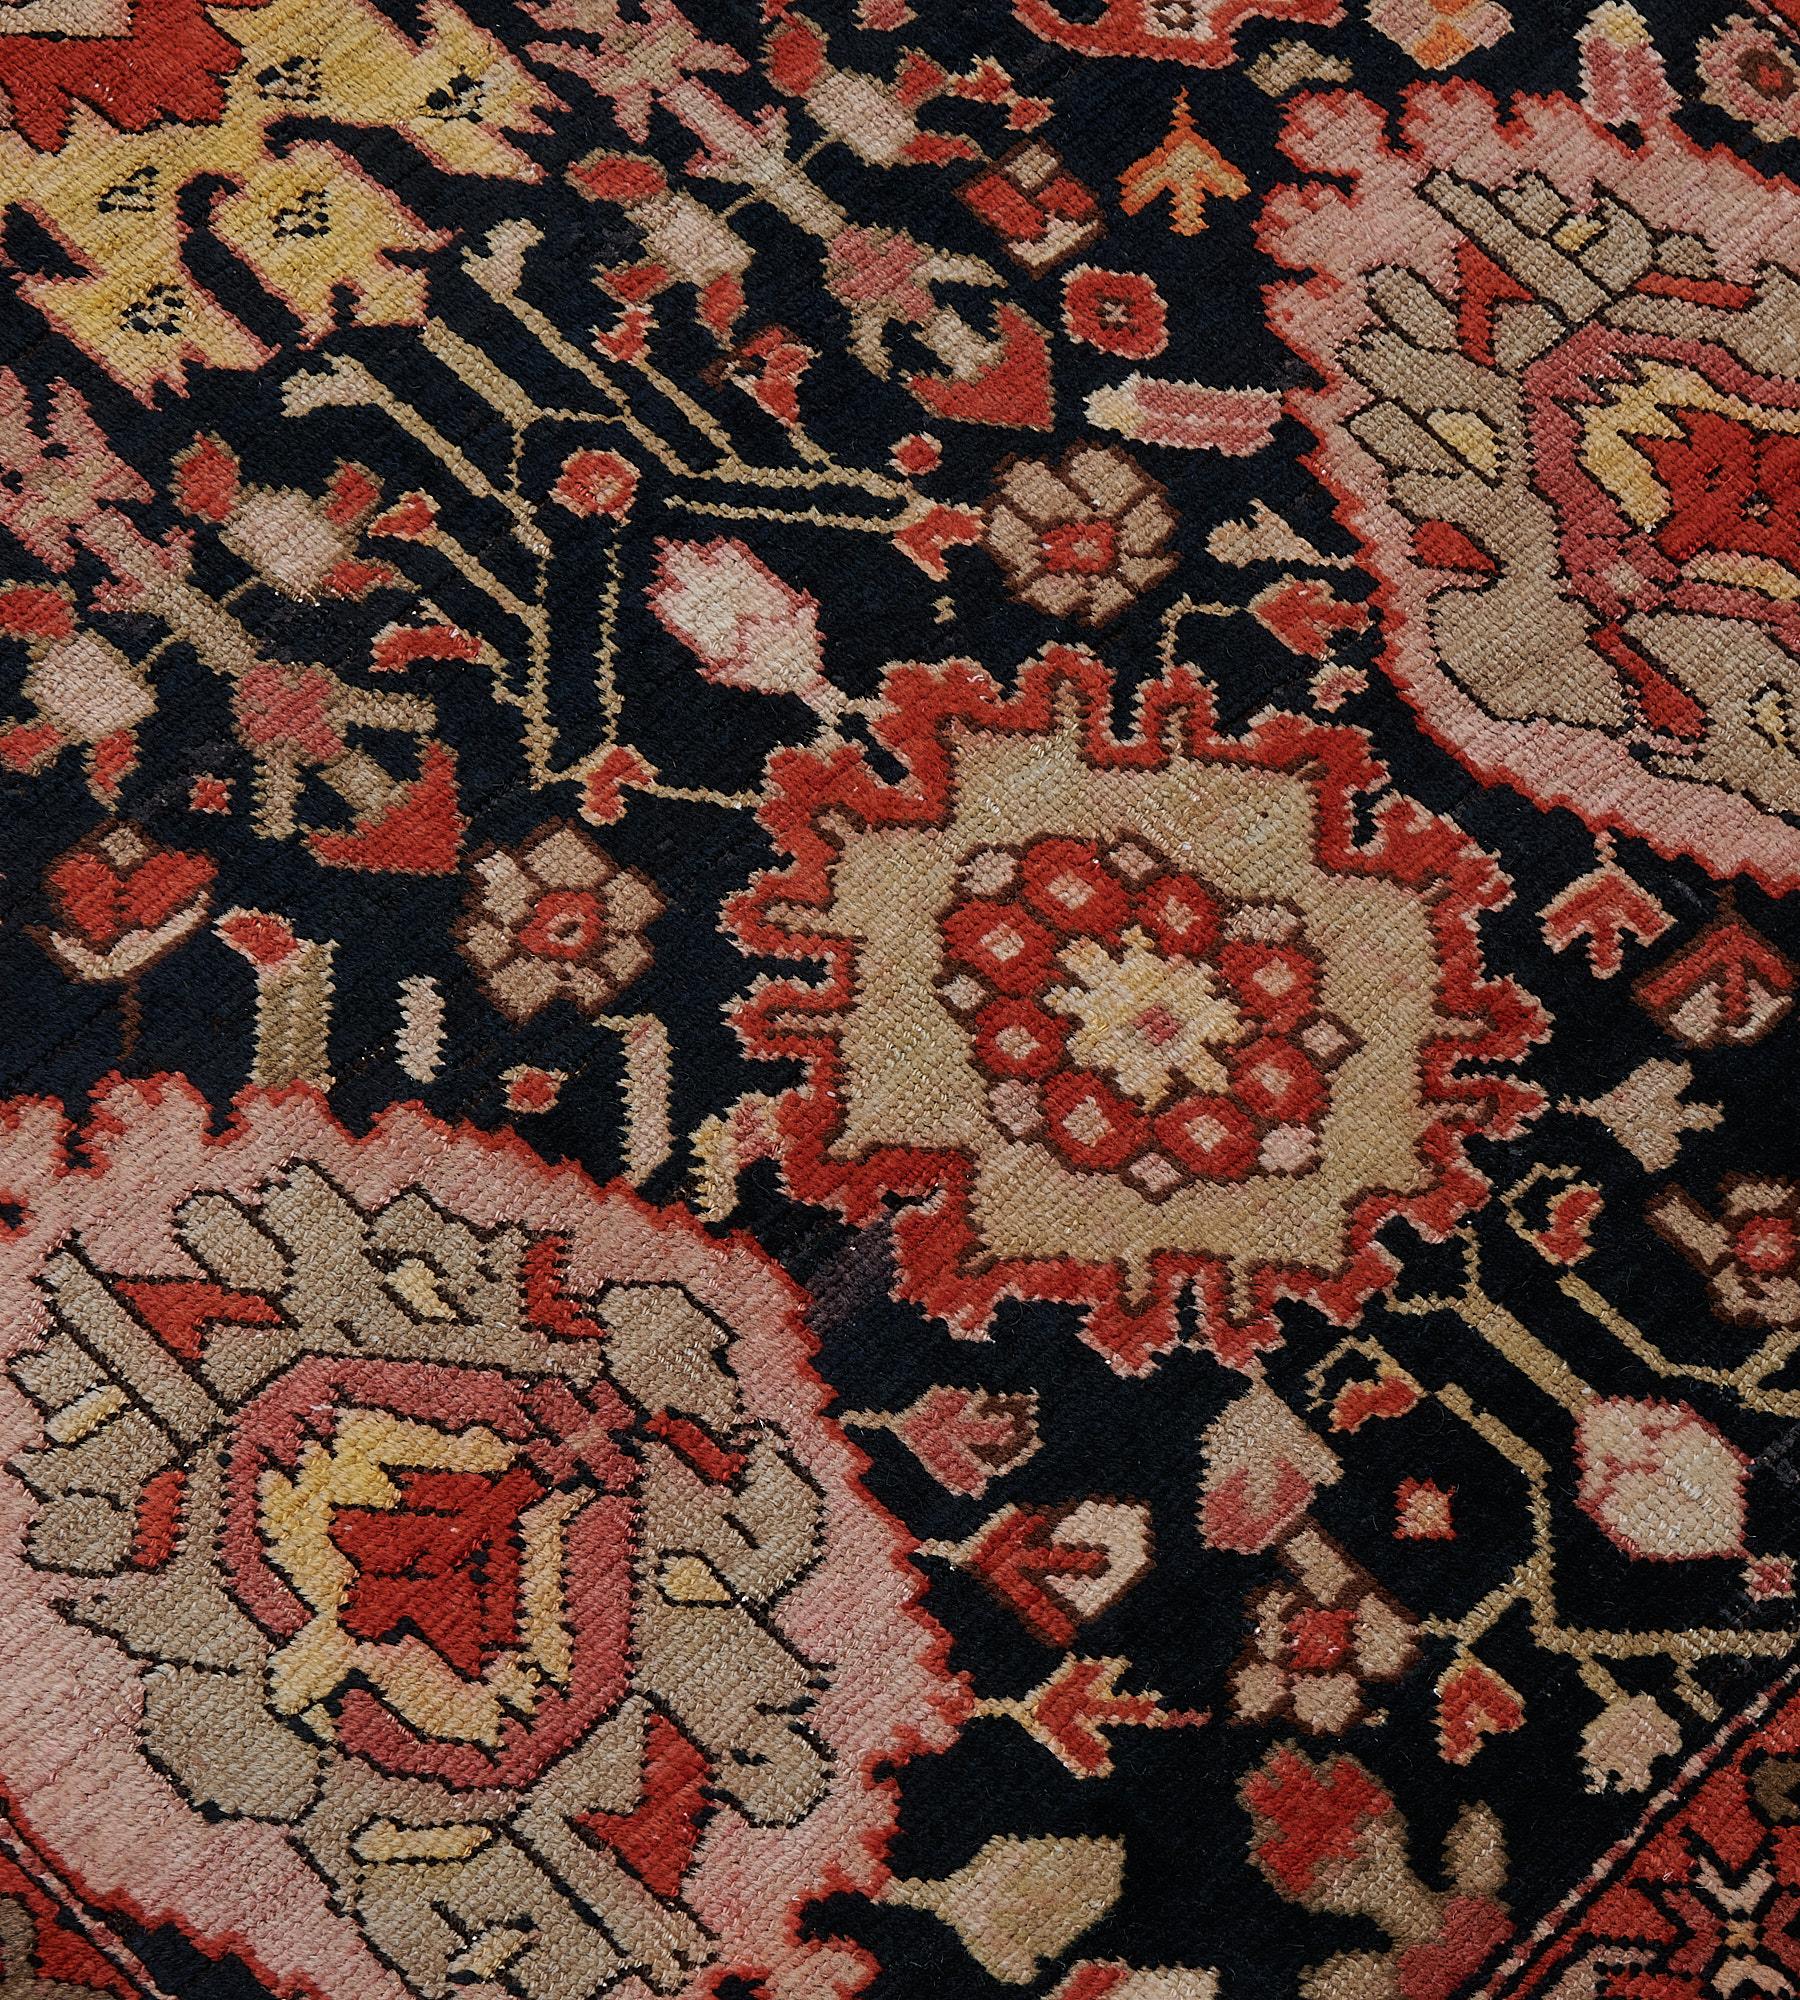 Late 19th Century Hand-Woven Antique Karabagh Runner In Good Condition For Sale In West Hollywood, CA